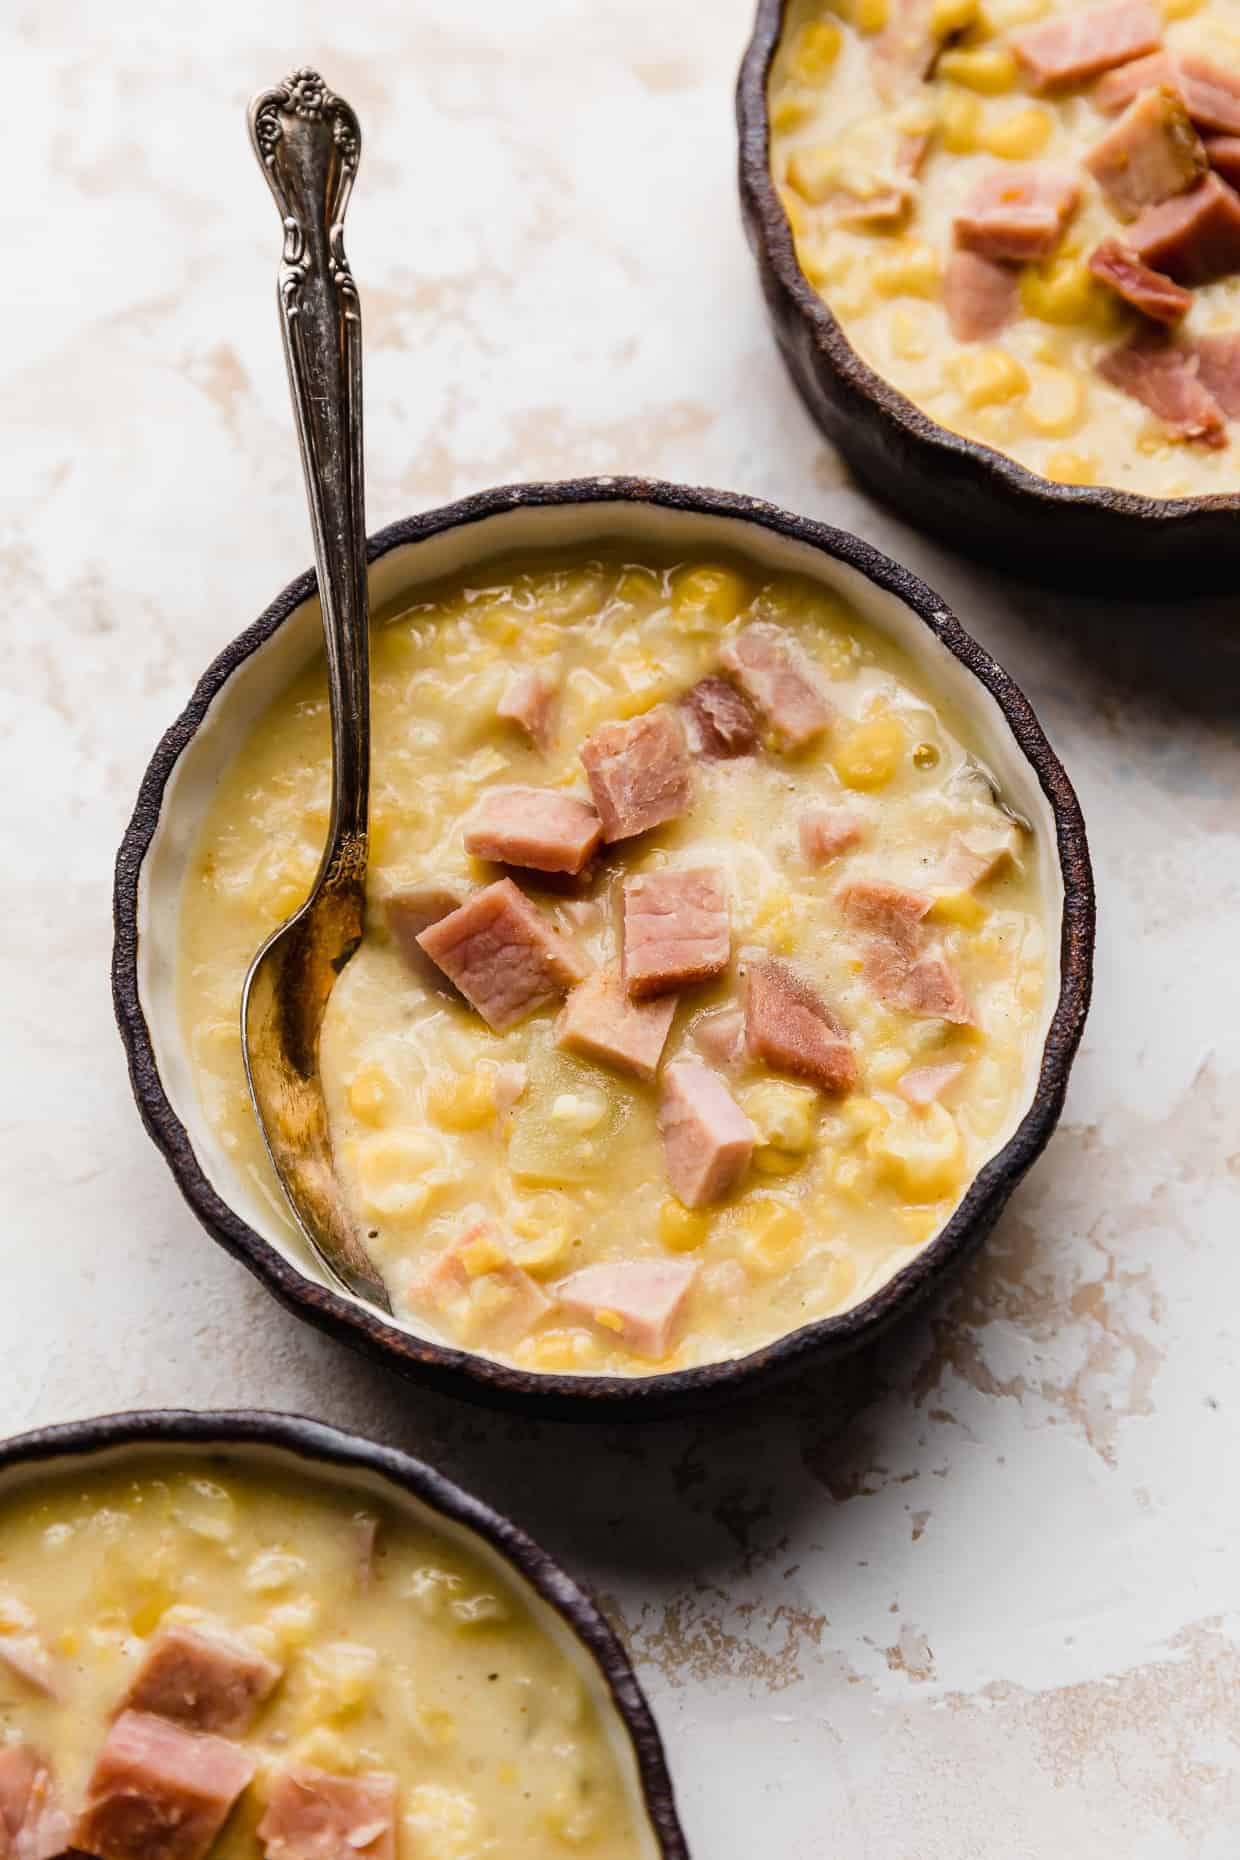 A close up of Ham and Corn Chowder in a black bowl against a white textured background.